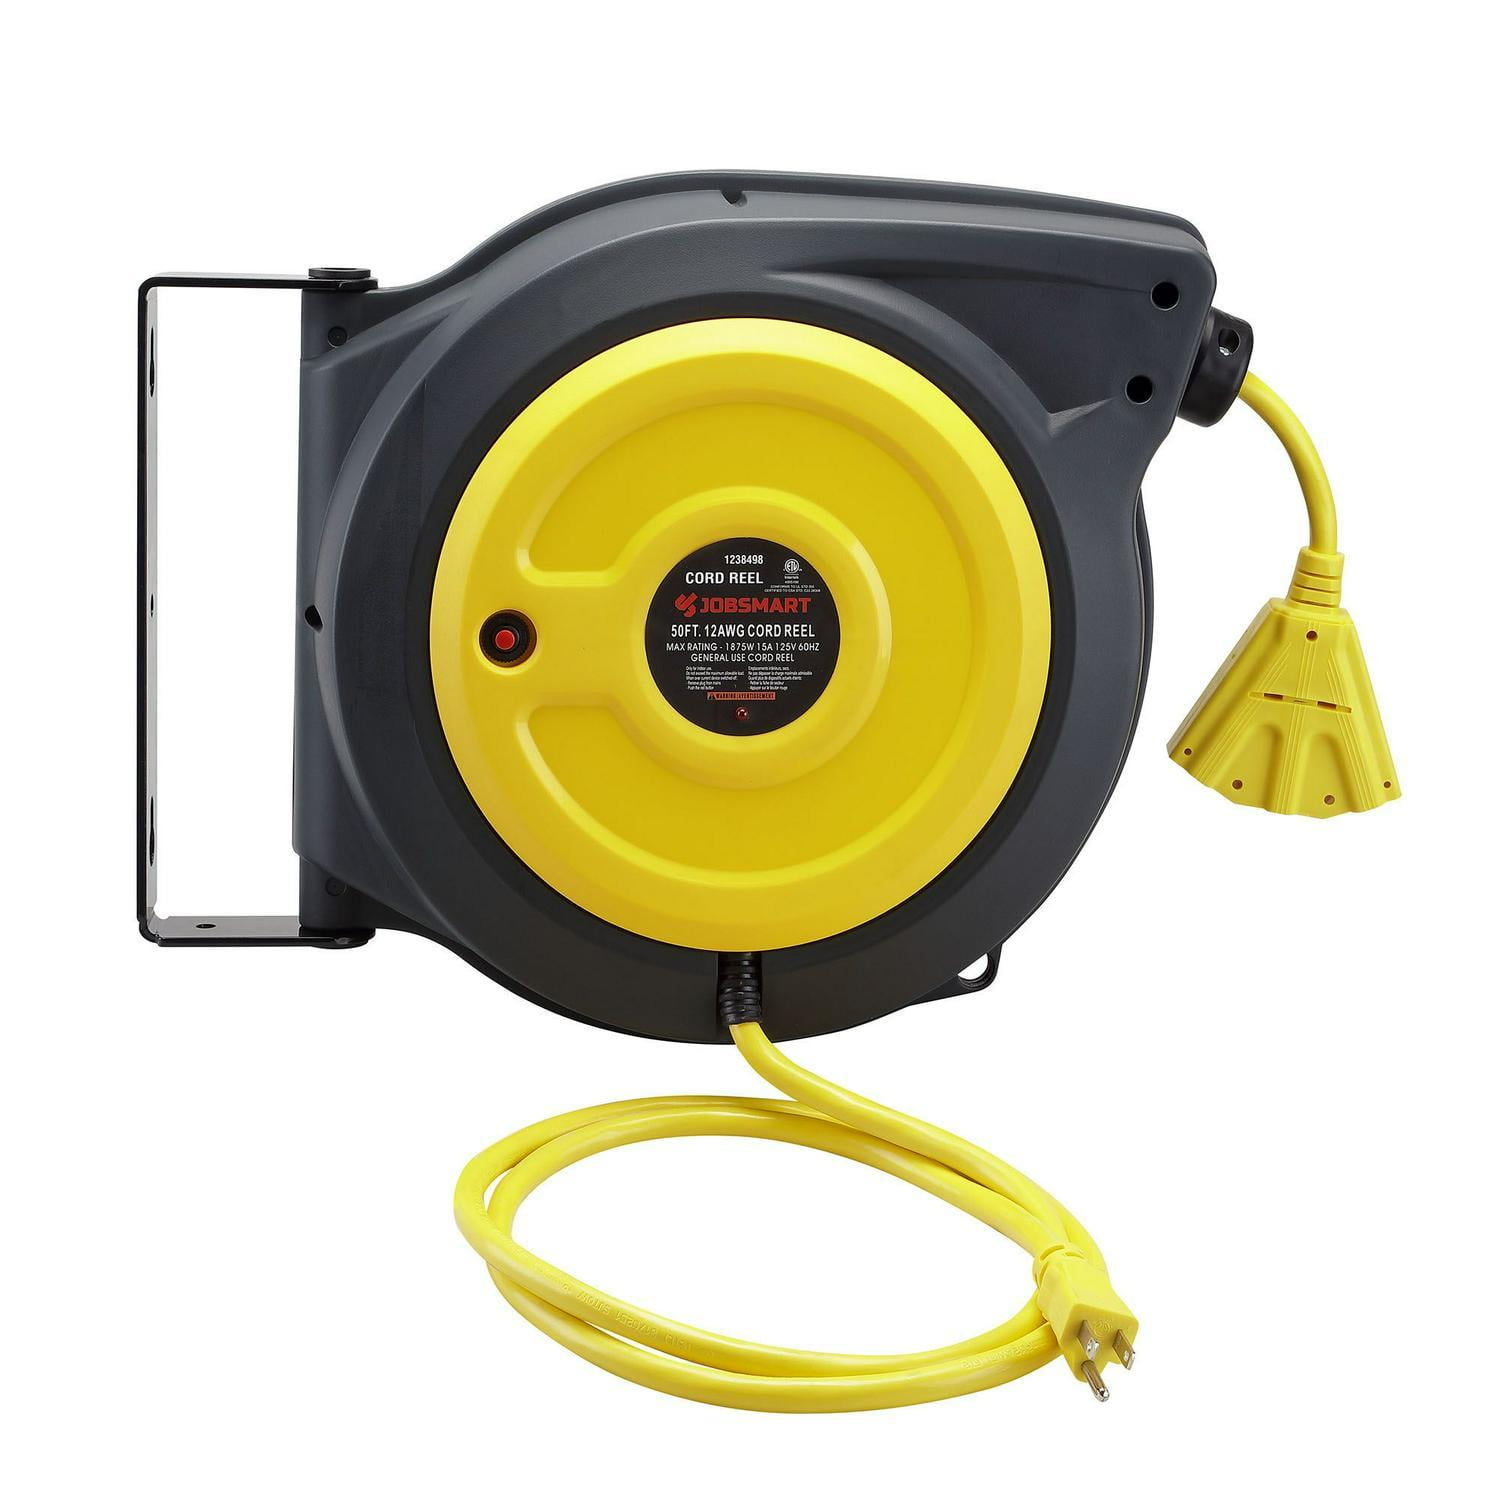 Dropship VEVOR Extension Cord Reel, 100FT, With 4 Outlets And Dust